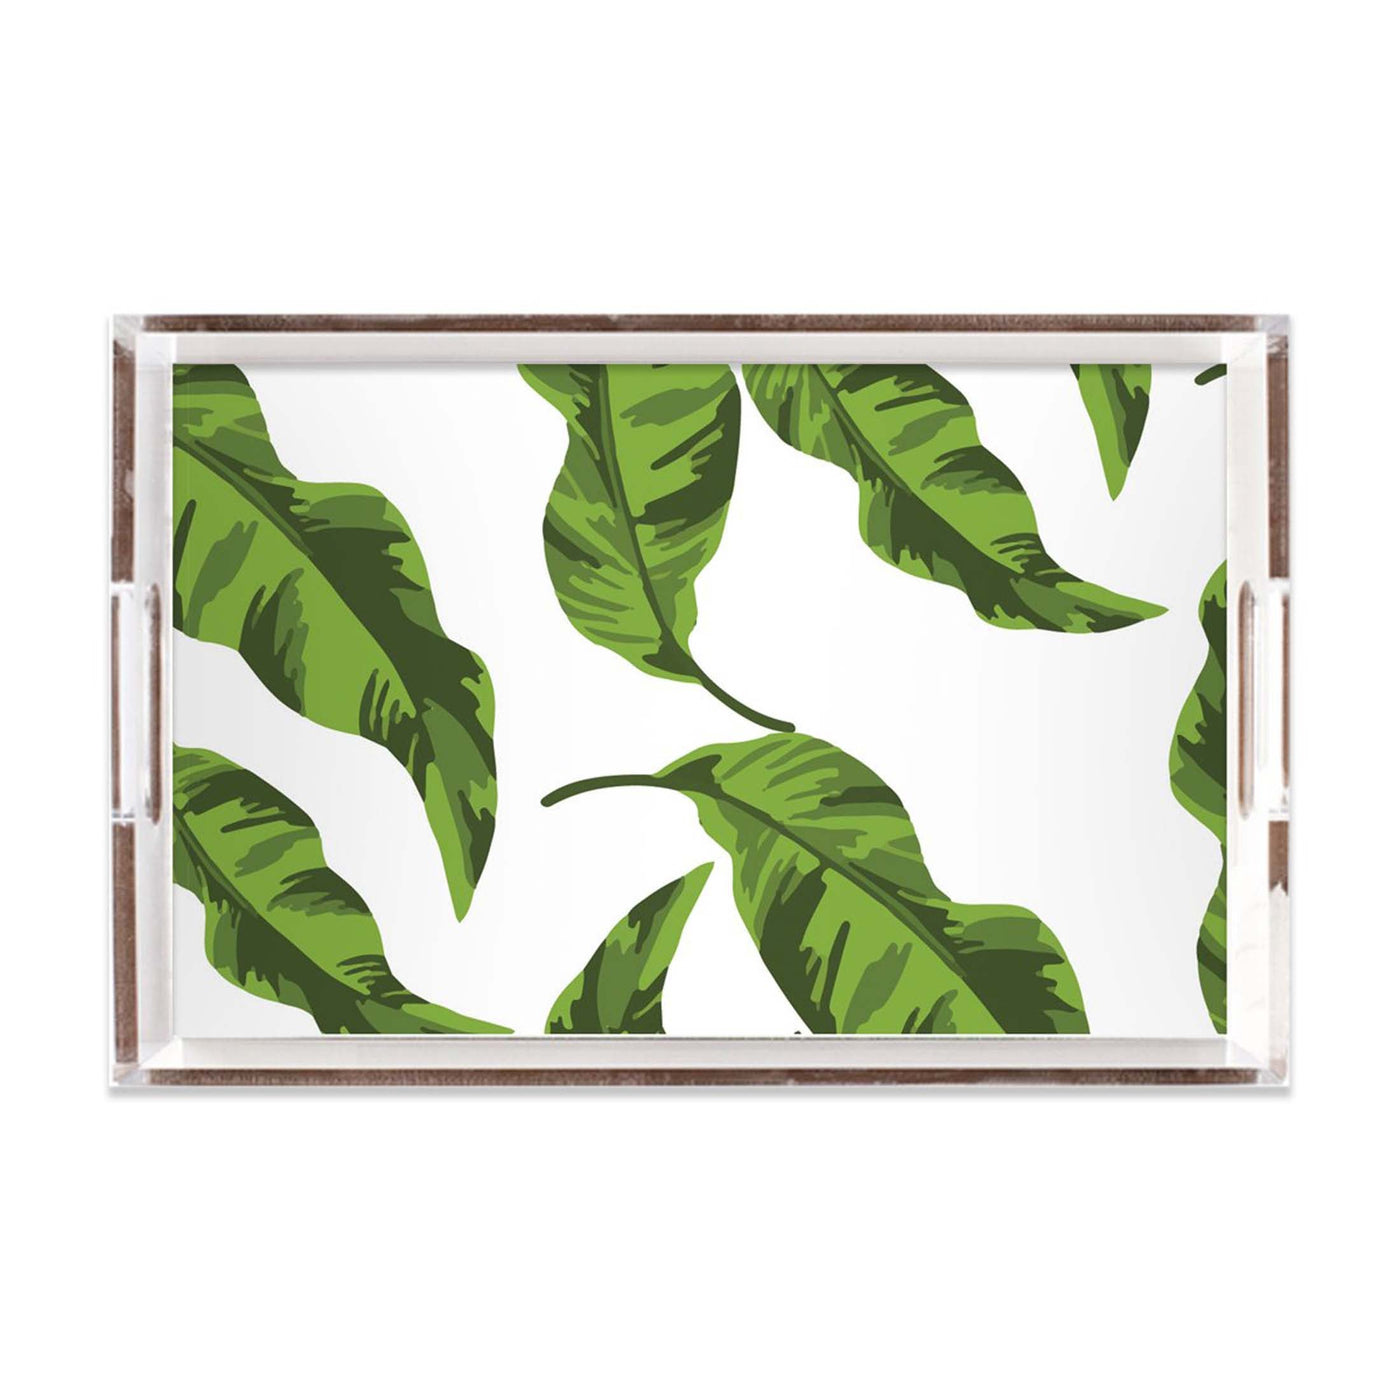 Banana Leaves Lucite Tray Lucite Trays Green / 11x17 Katie Kime